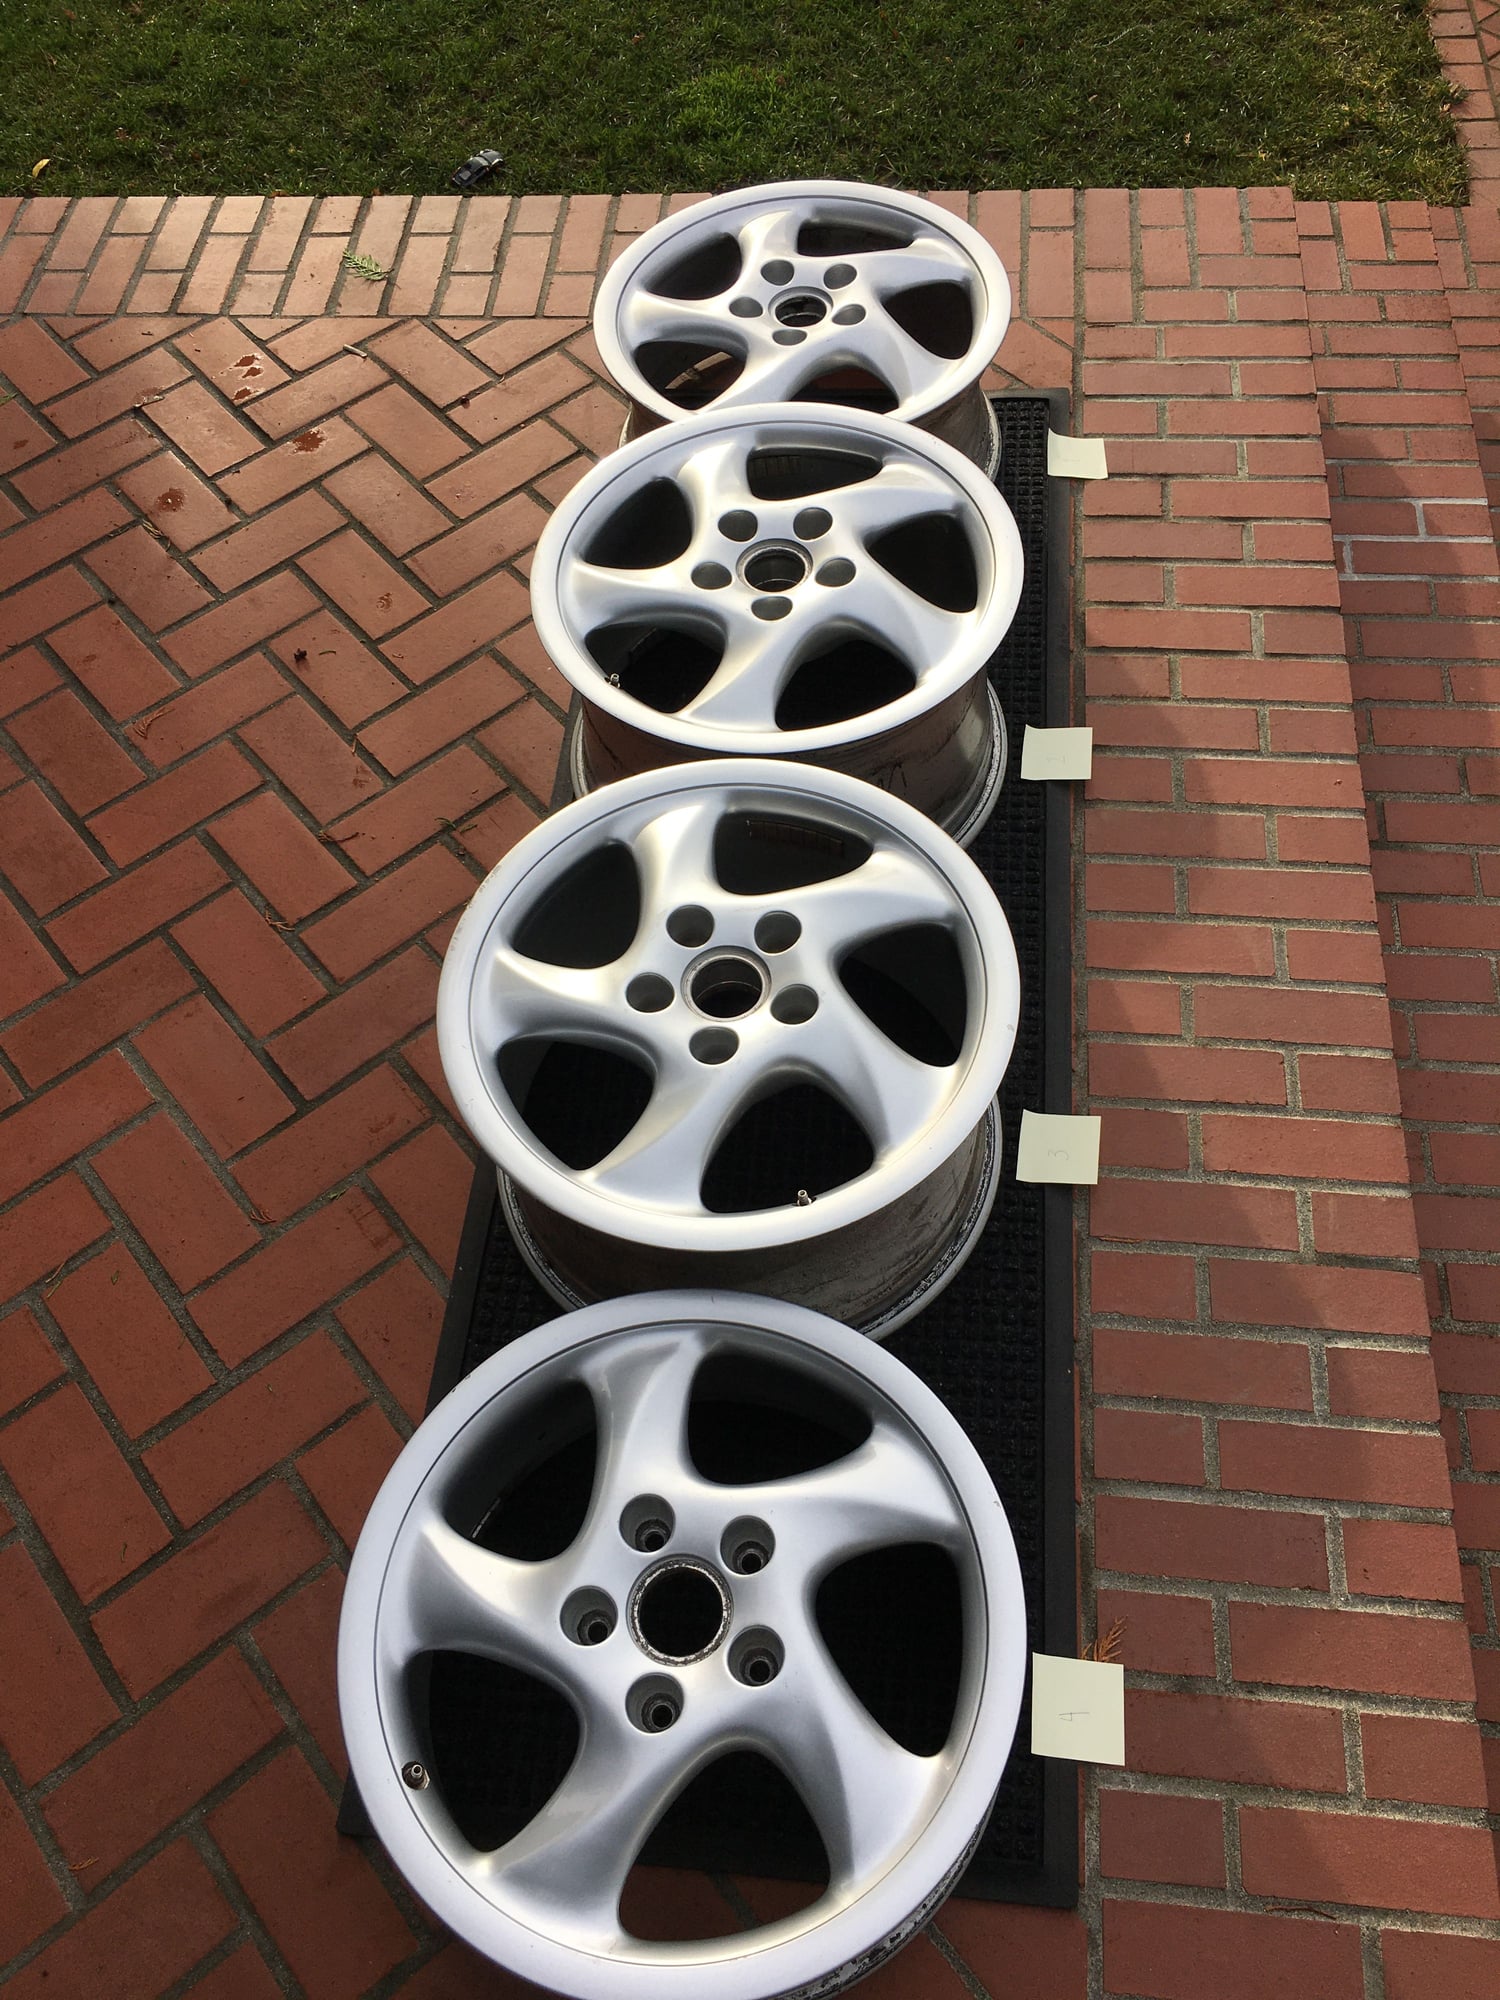 Wheels and Tires/Axles - 993 NB OEM Hollow Spoke Wheel set. - Used - 0  All Models - Portland, OR 97215, United States